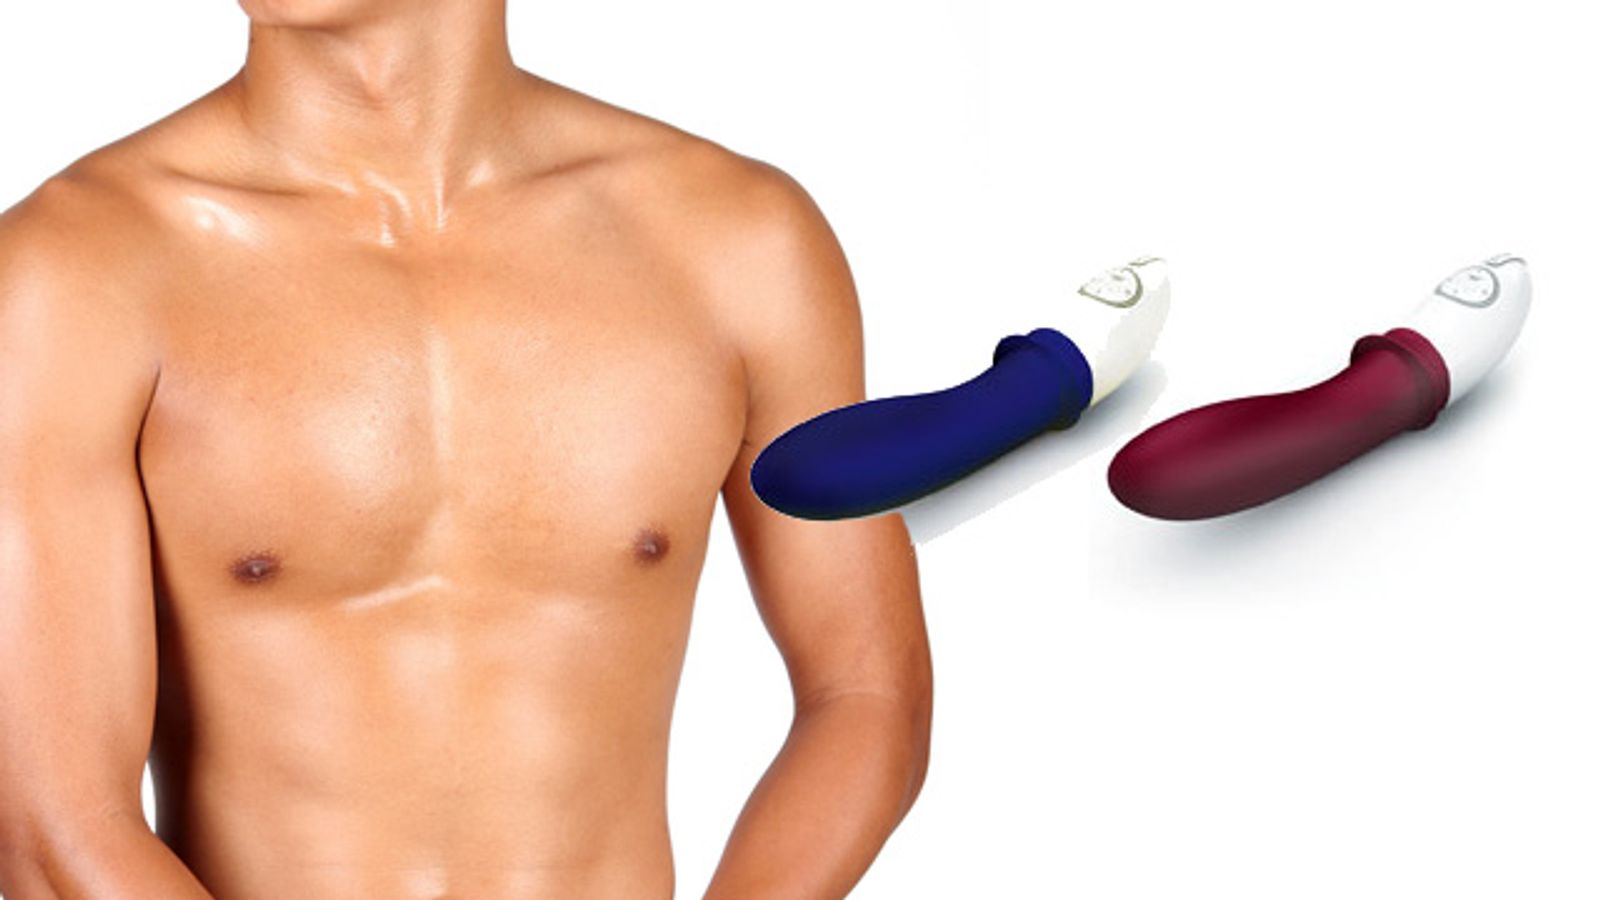 LELO's BILLY: For Men Who Take Their Pleasure in Style